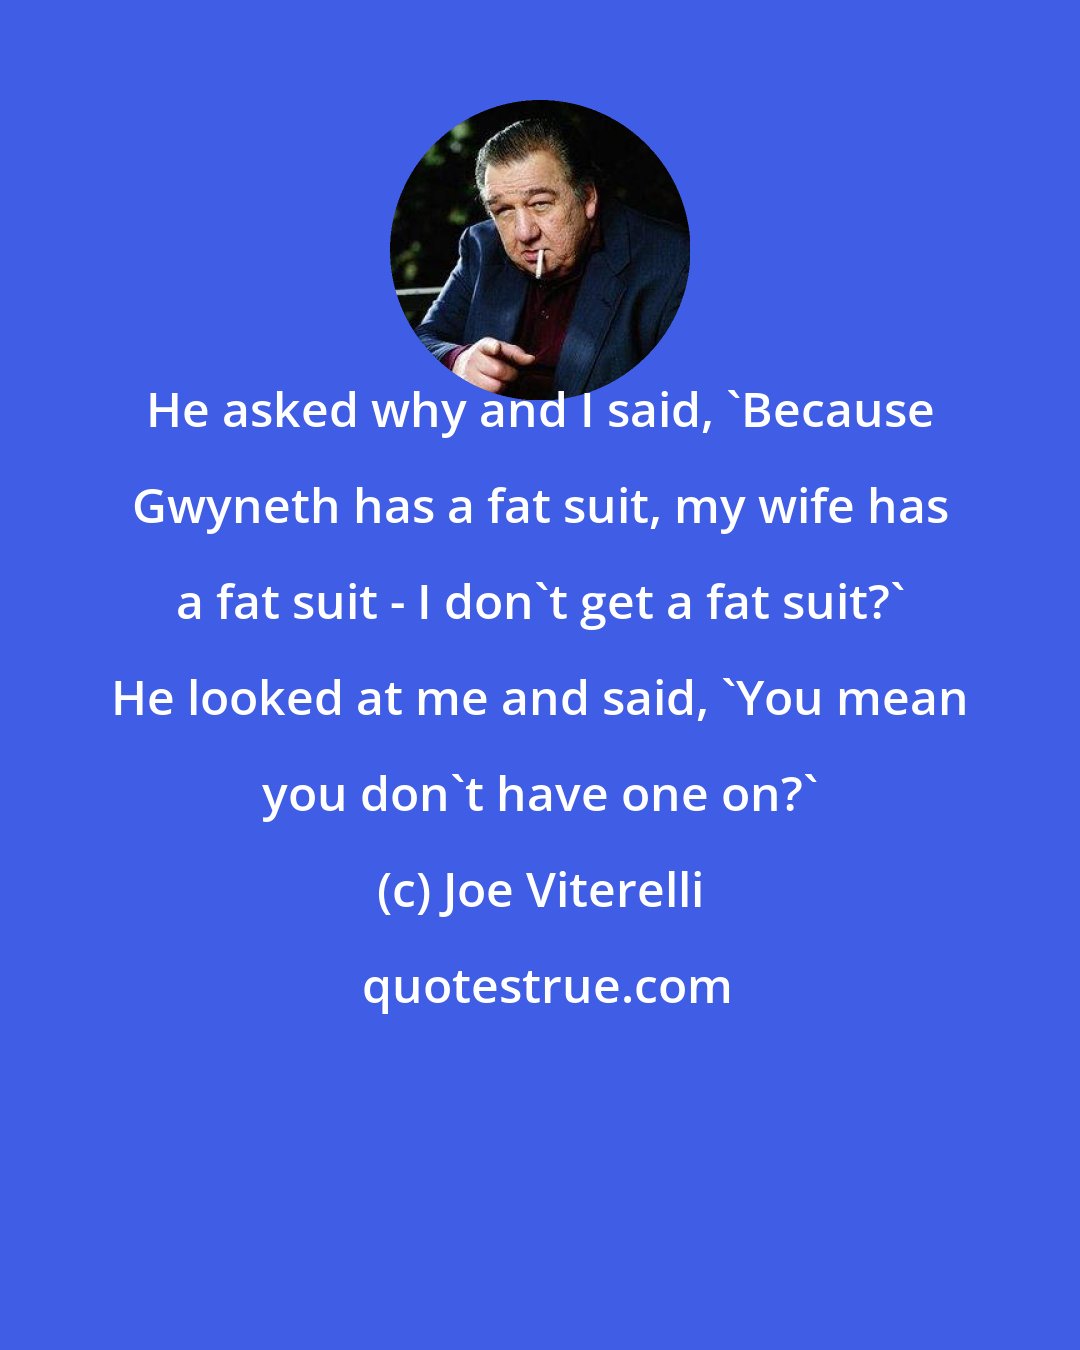 Joe Viterelli: He asked why and I said, 'Because Gwyneth has a fat suit, my wife has a fat suit - I don't get a fat suit?' He looked at me and said, 'You mean you don't have one on?'